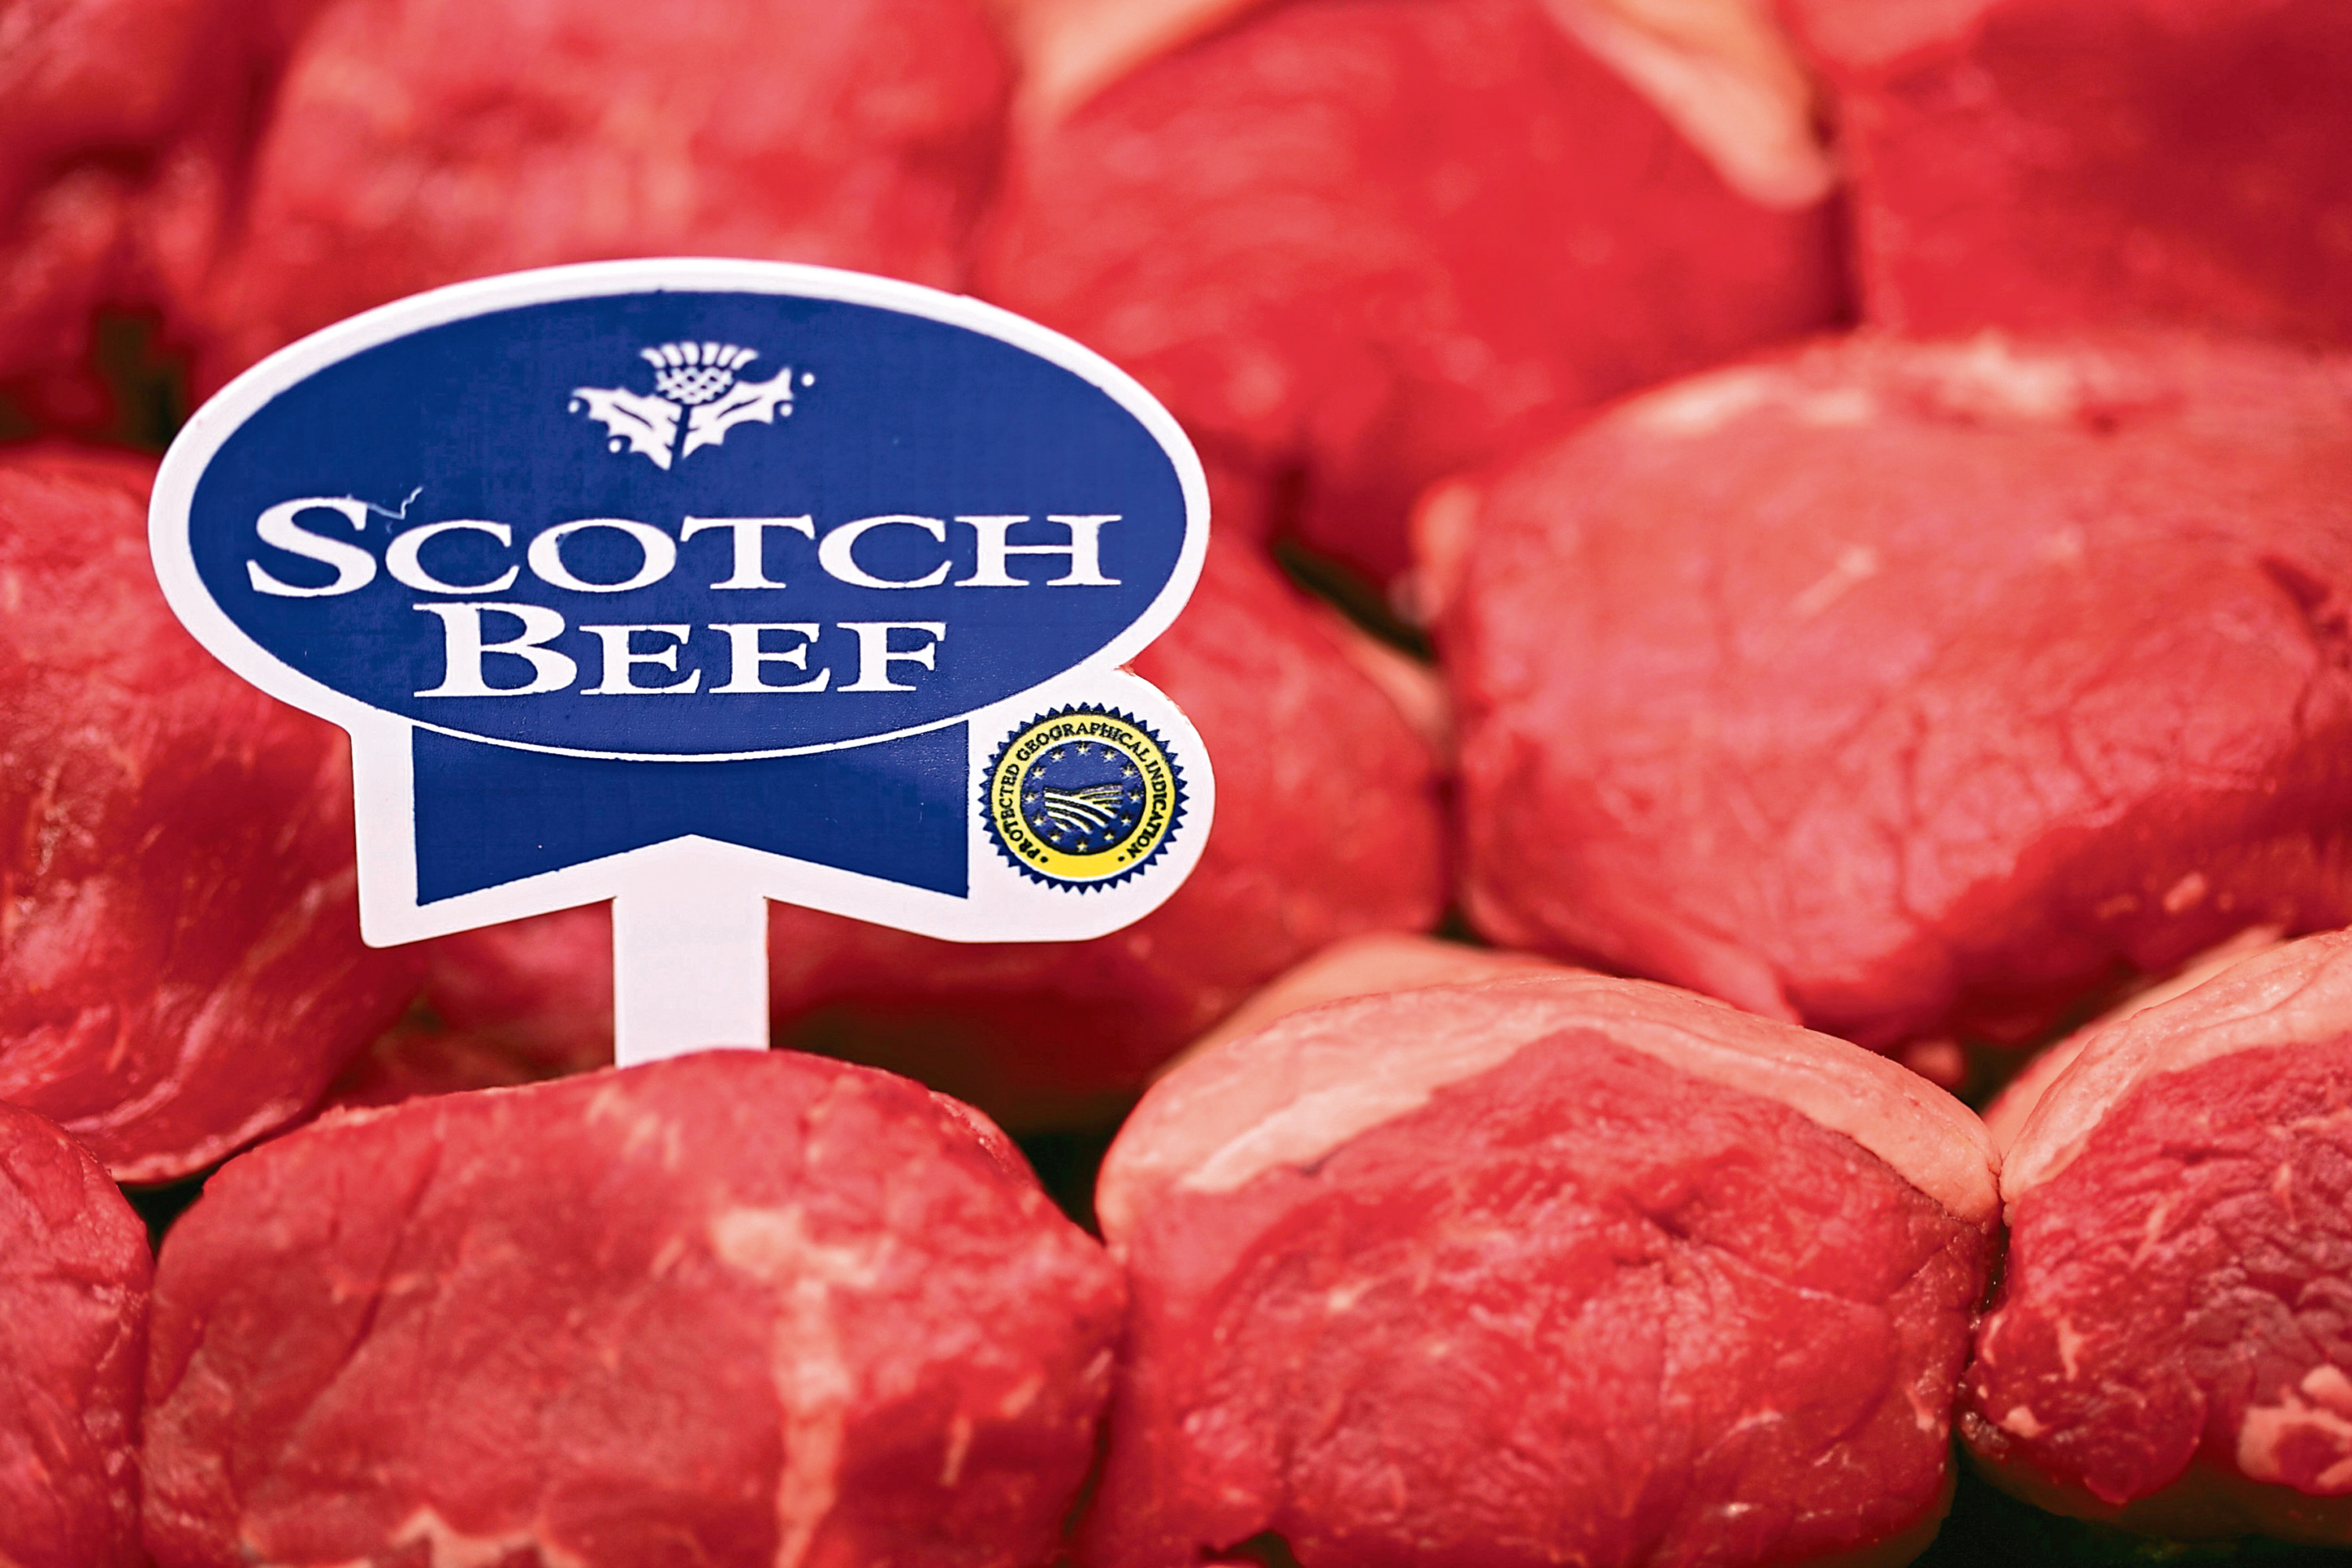 The competition aims to find the best product made using Scotch Beef, Scotch Lamb or Specially Selected Pork.